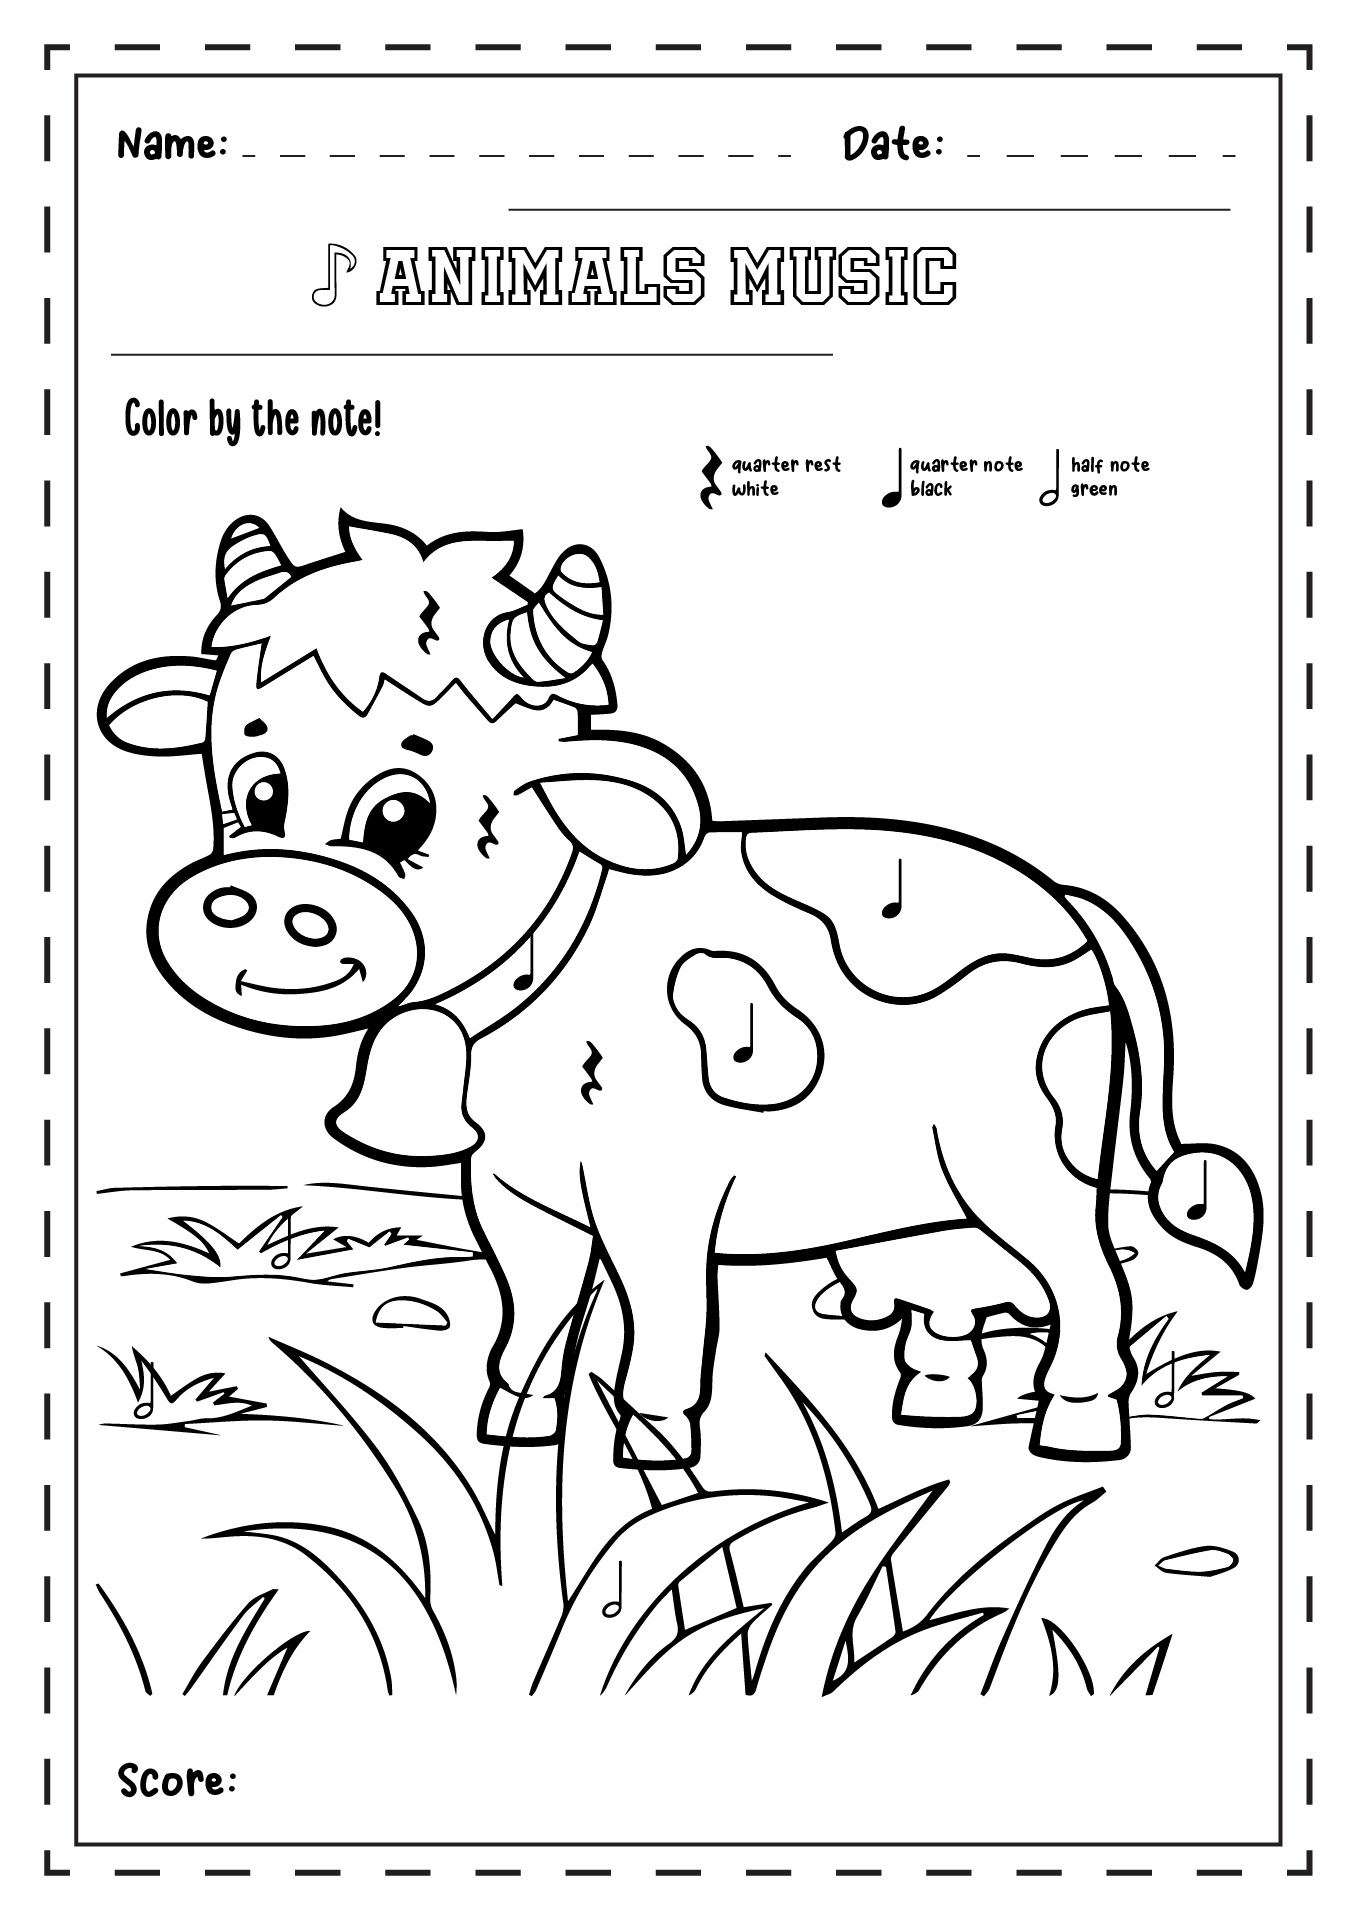 Carnival of the Animals Music Lessons Image